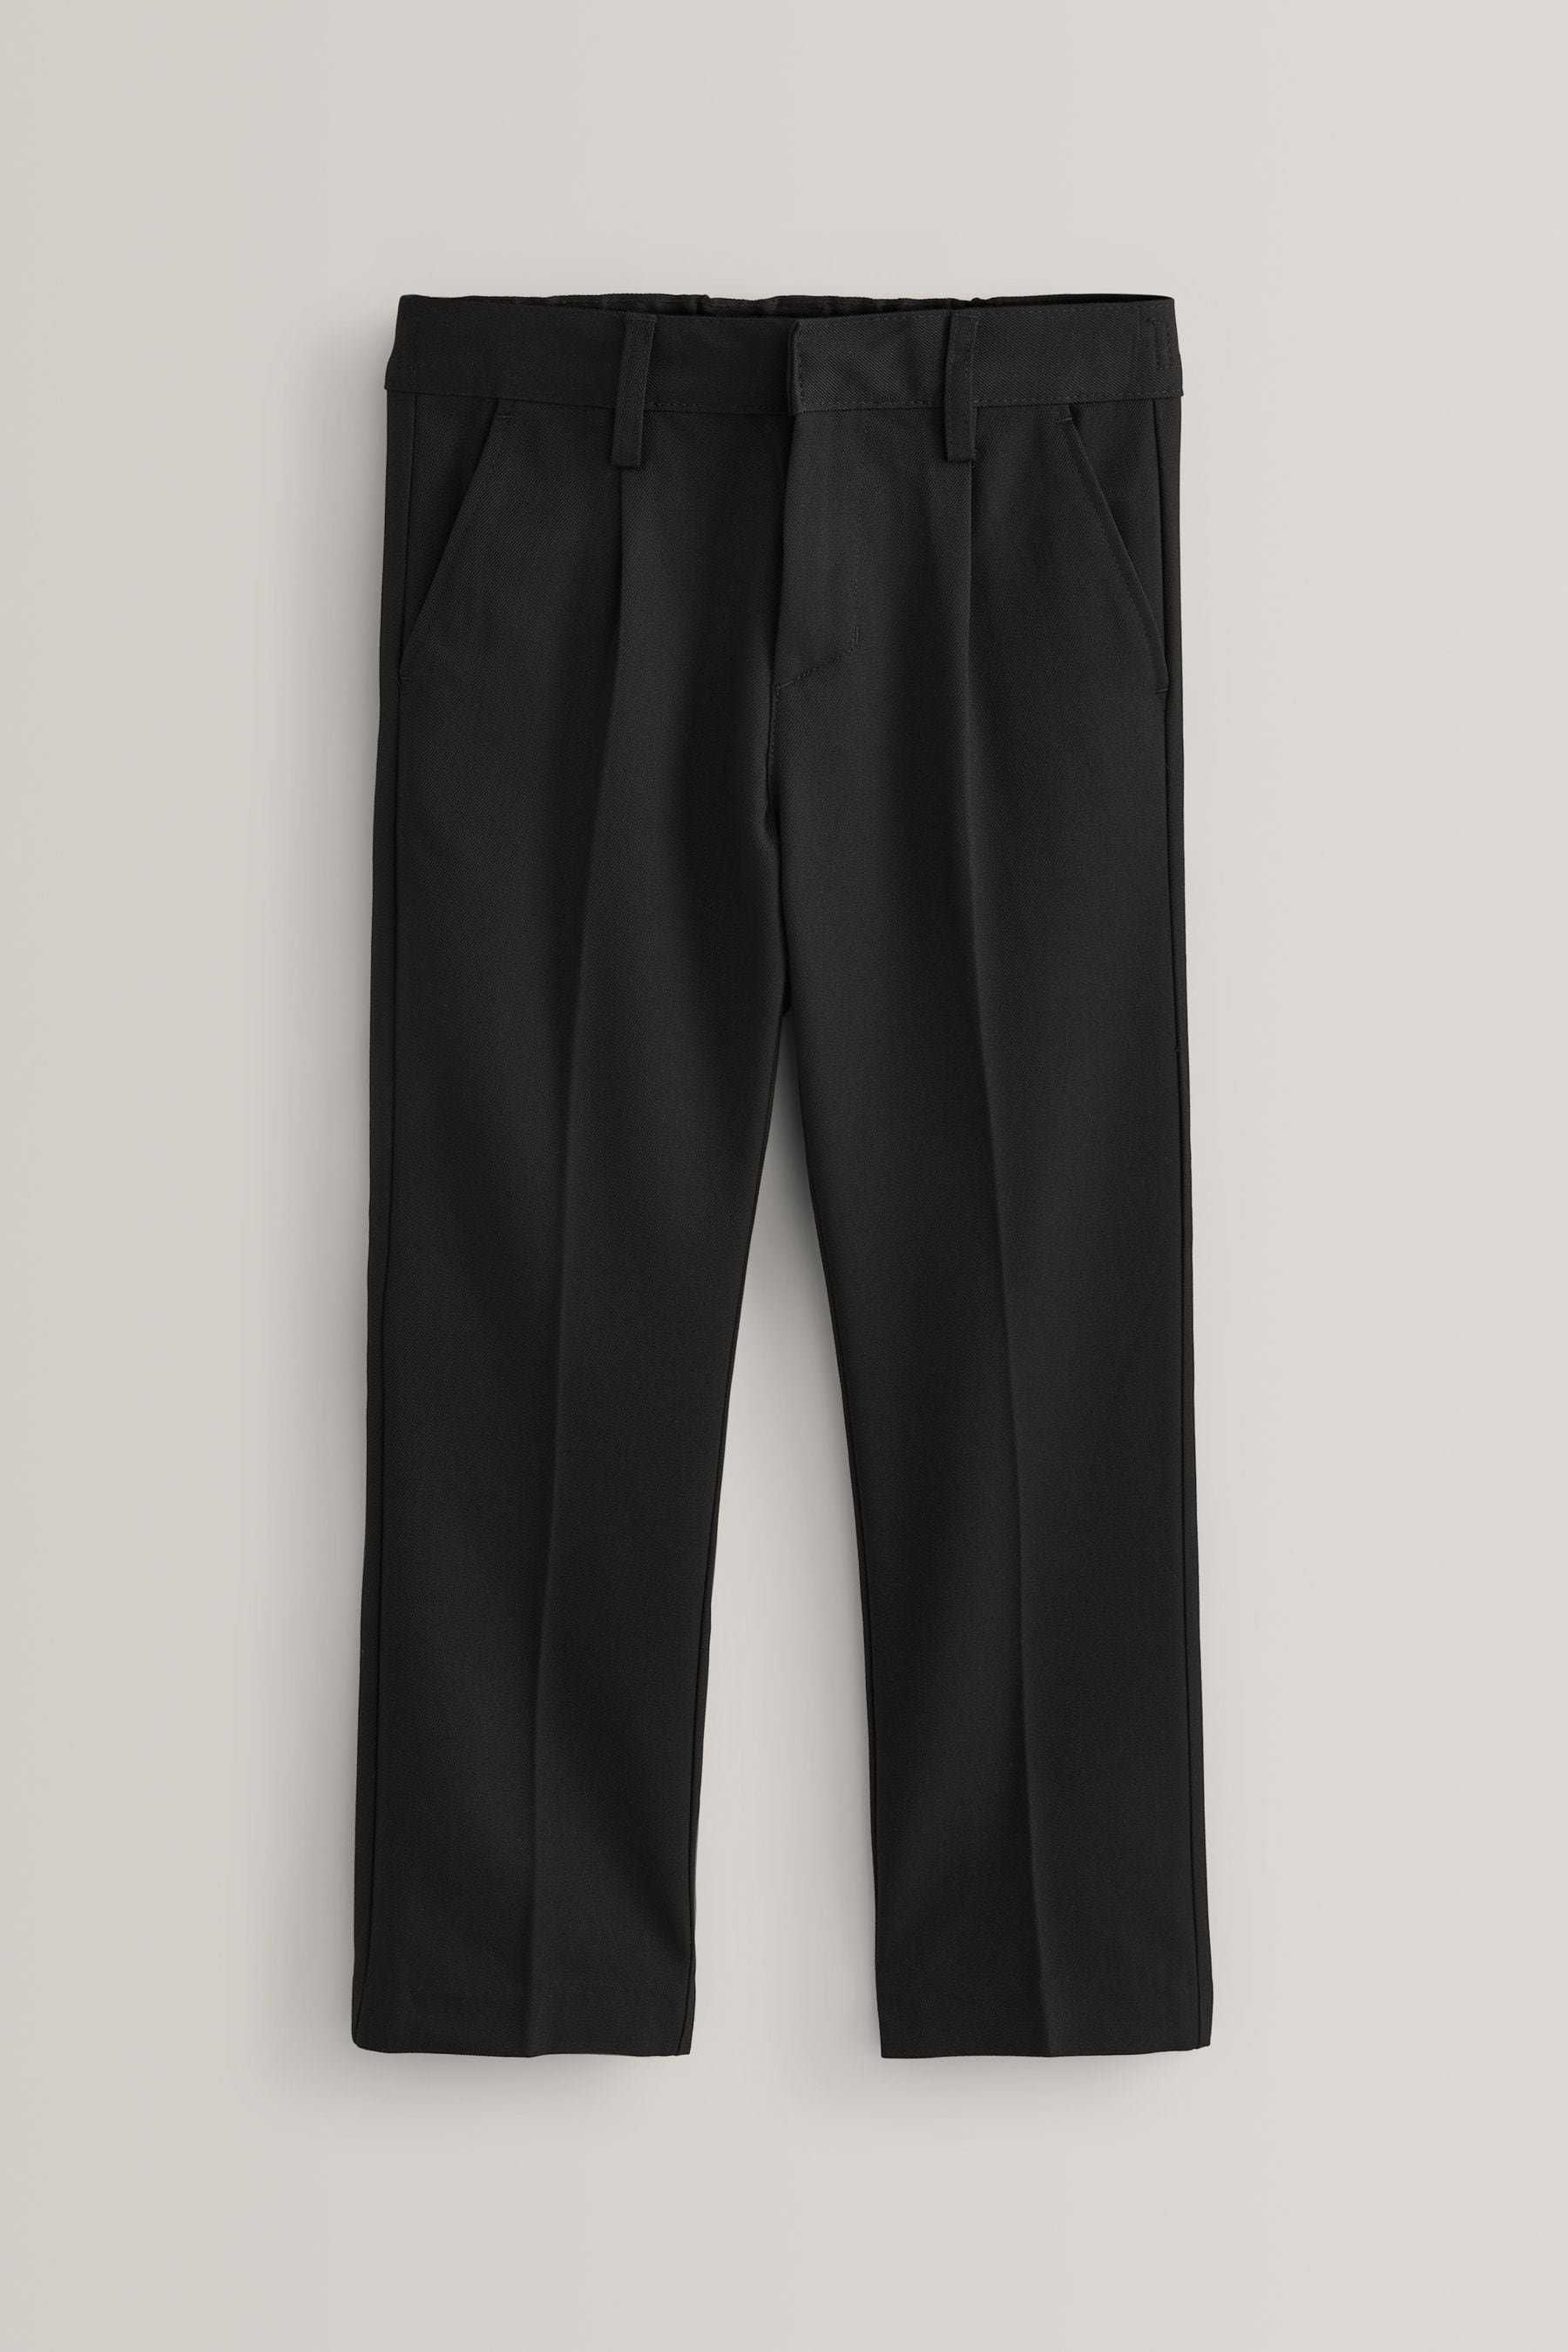 Buy Black Regular Waist School Pleat Front Trousers (3-17yrs) from the ...